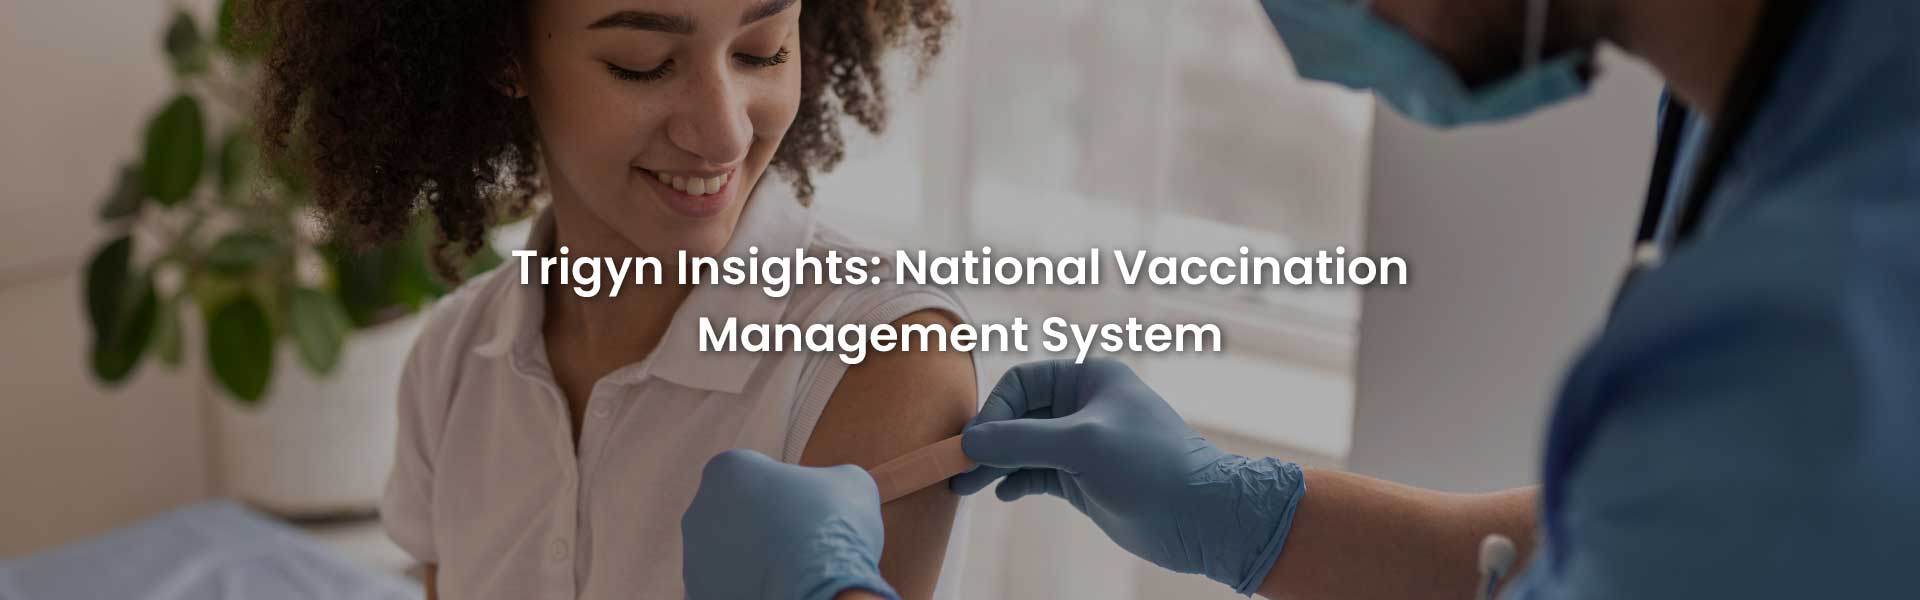 Cloud-native, Highly-scalable Solution for a National COVID-19 Vaccination Management System